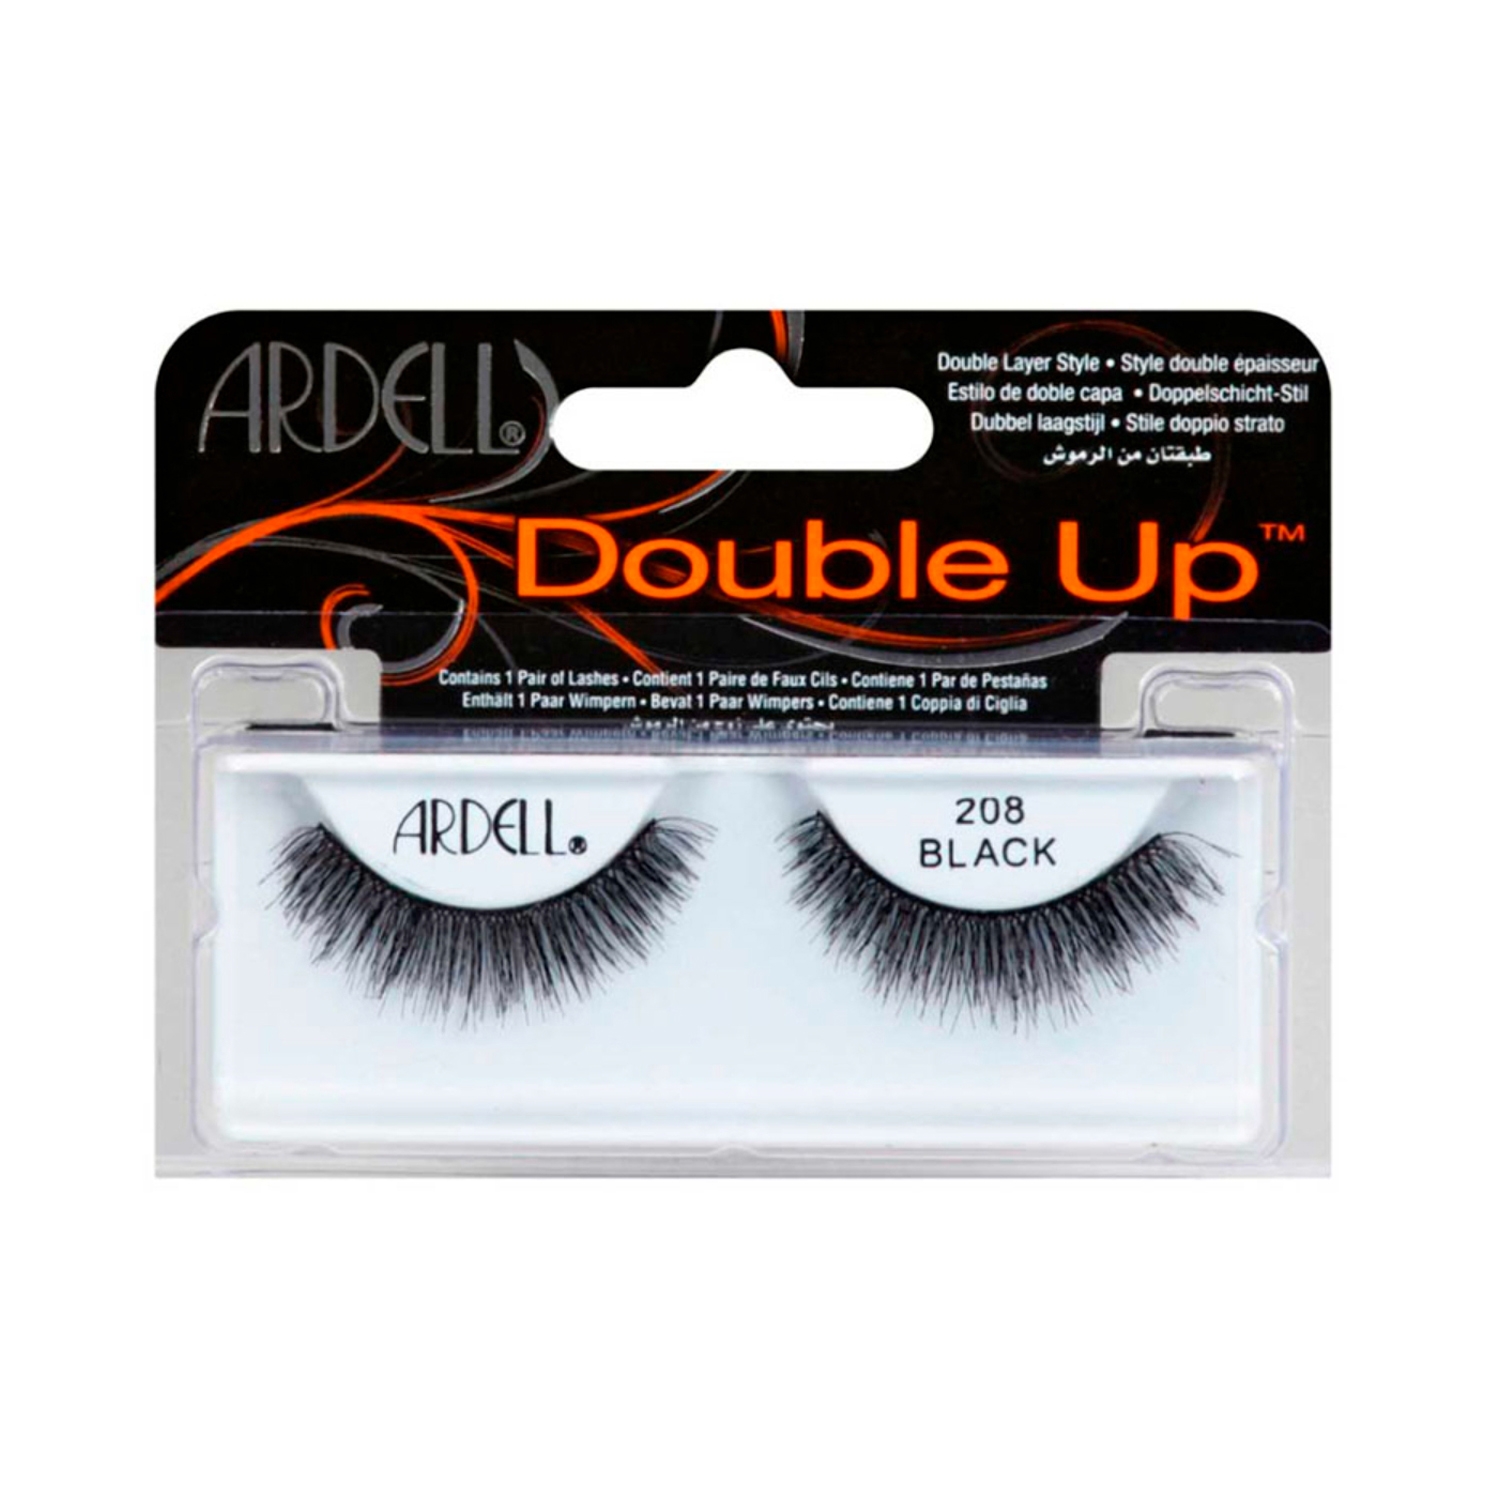 Ardell | Ardell Double Up Eyelashes 208 Black - 61914 (1 Pair)